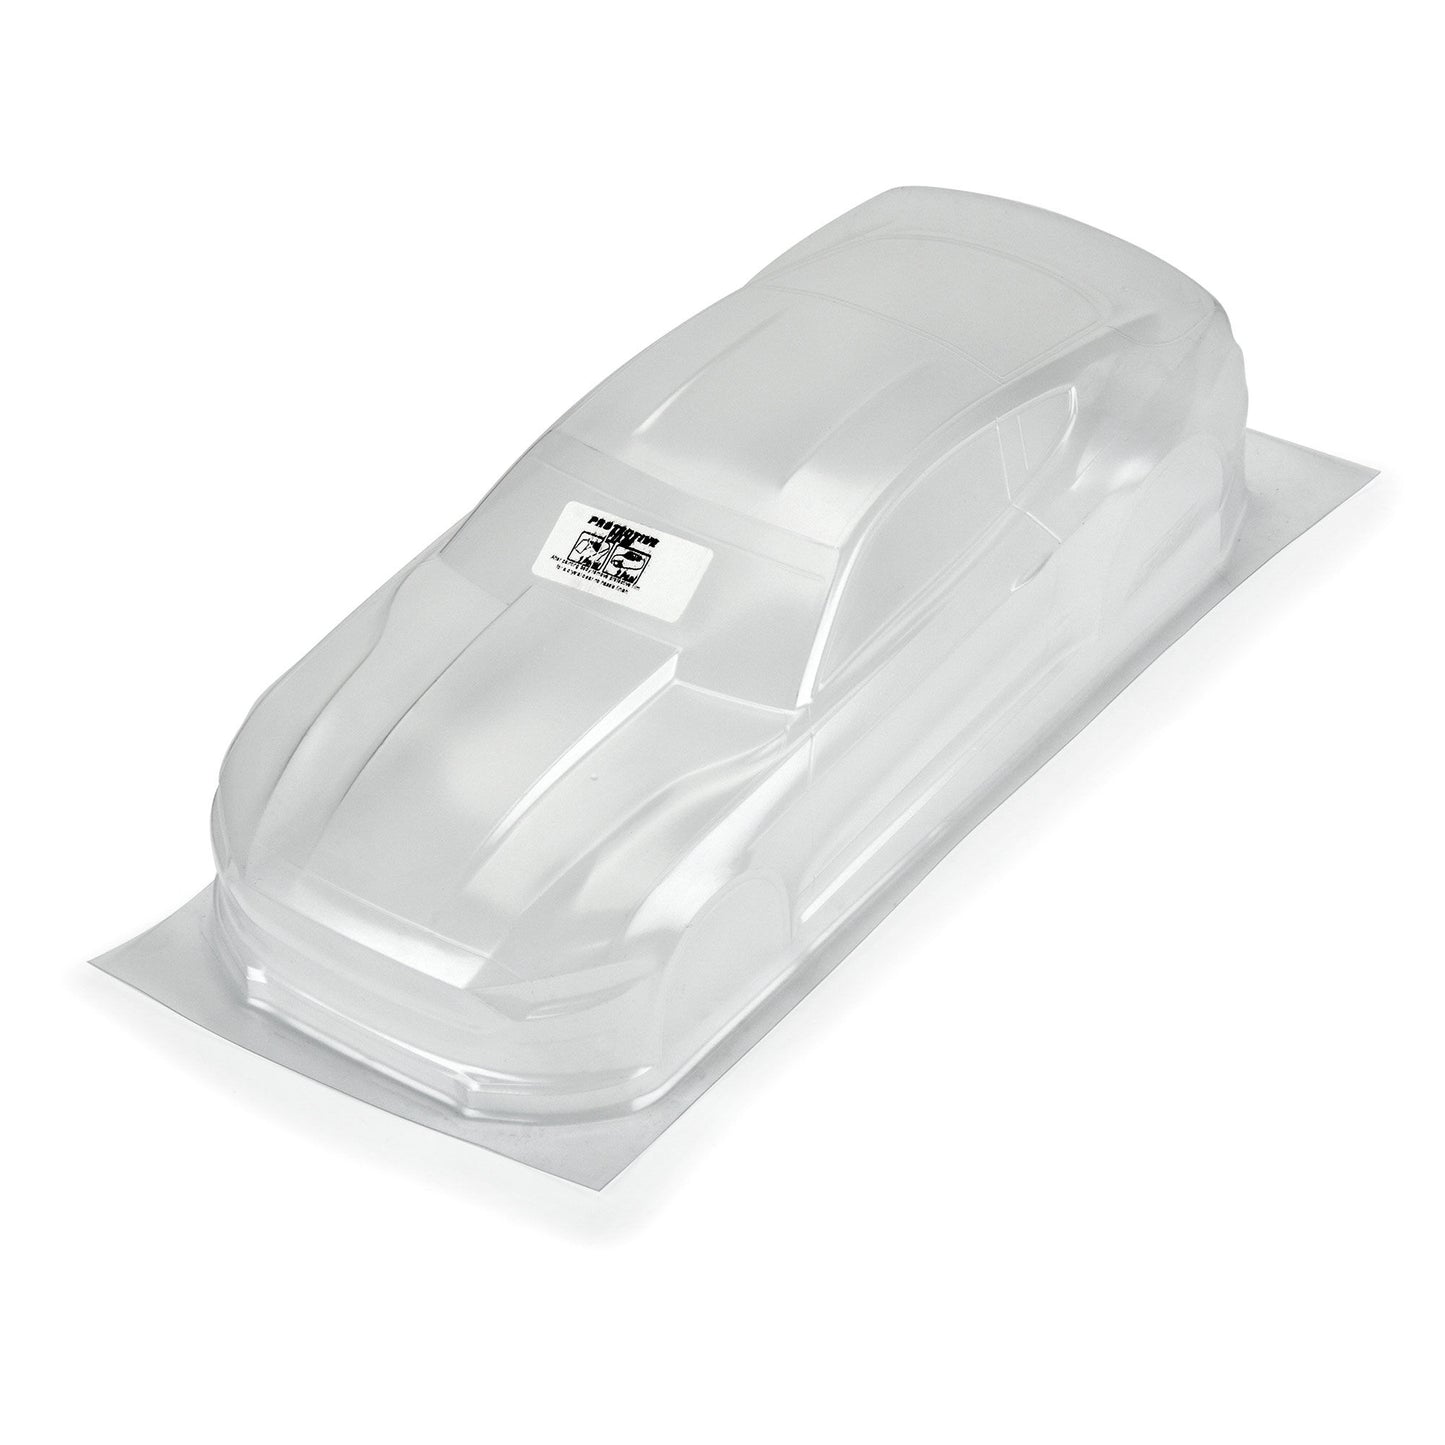 Pro-Line Racing PRO360500 1:16 2021 Ford Mustang Cobra Jet Clear Body